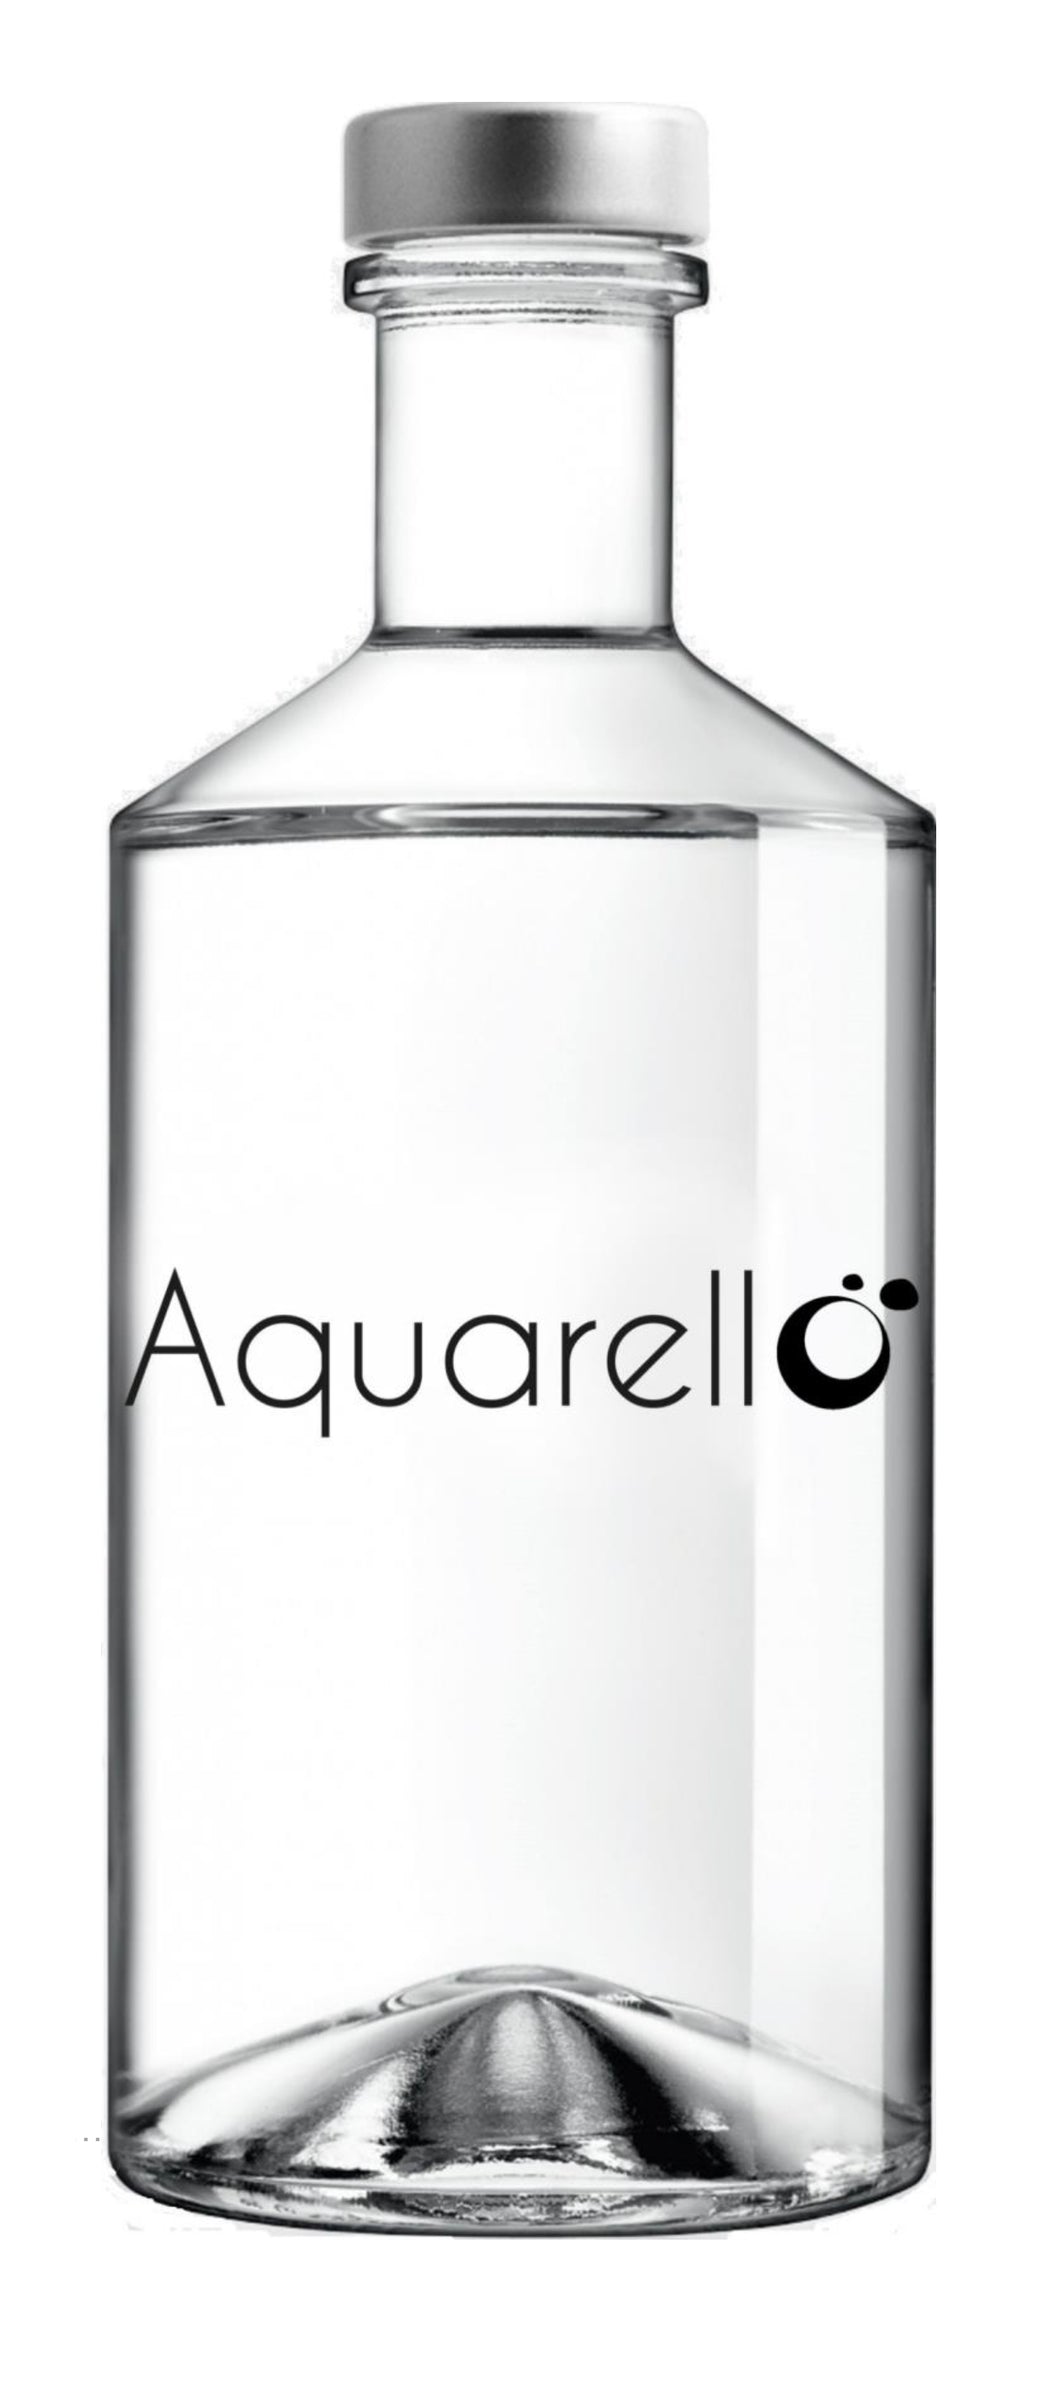 A labeled glass bottle with a capacity of 75cl